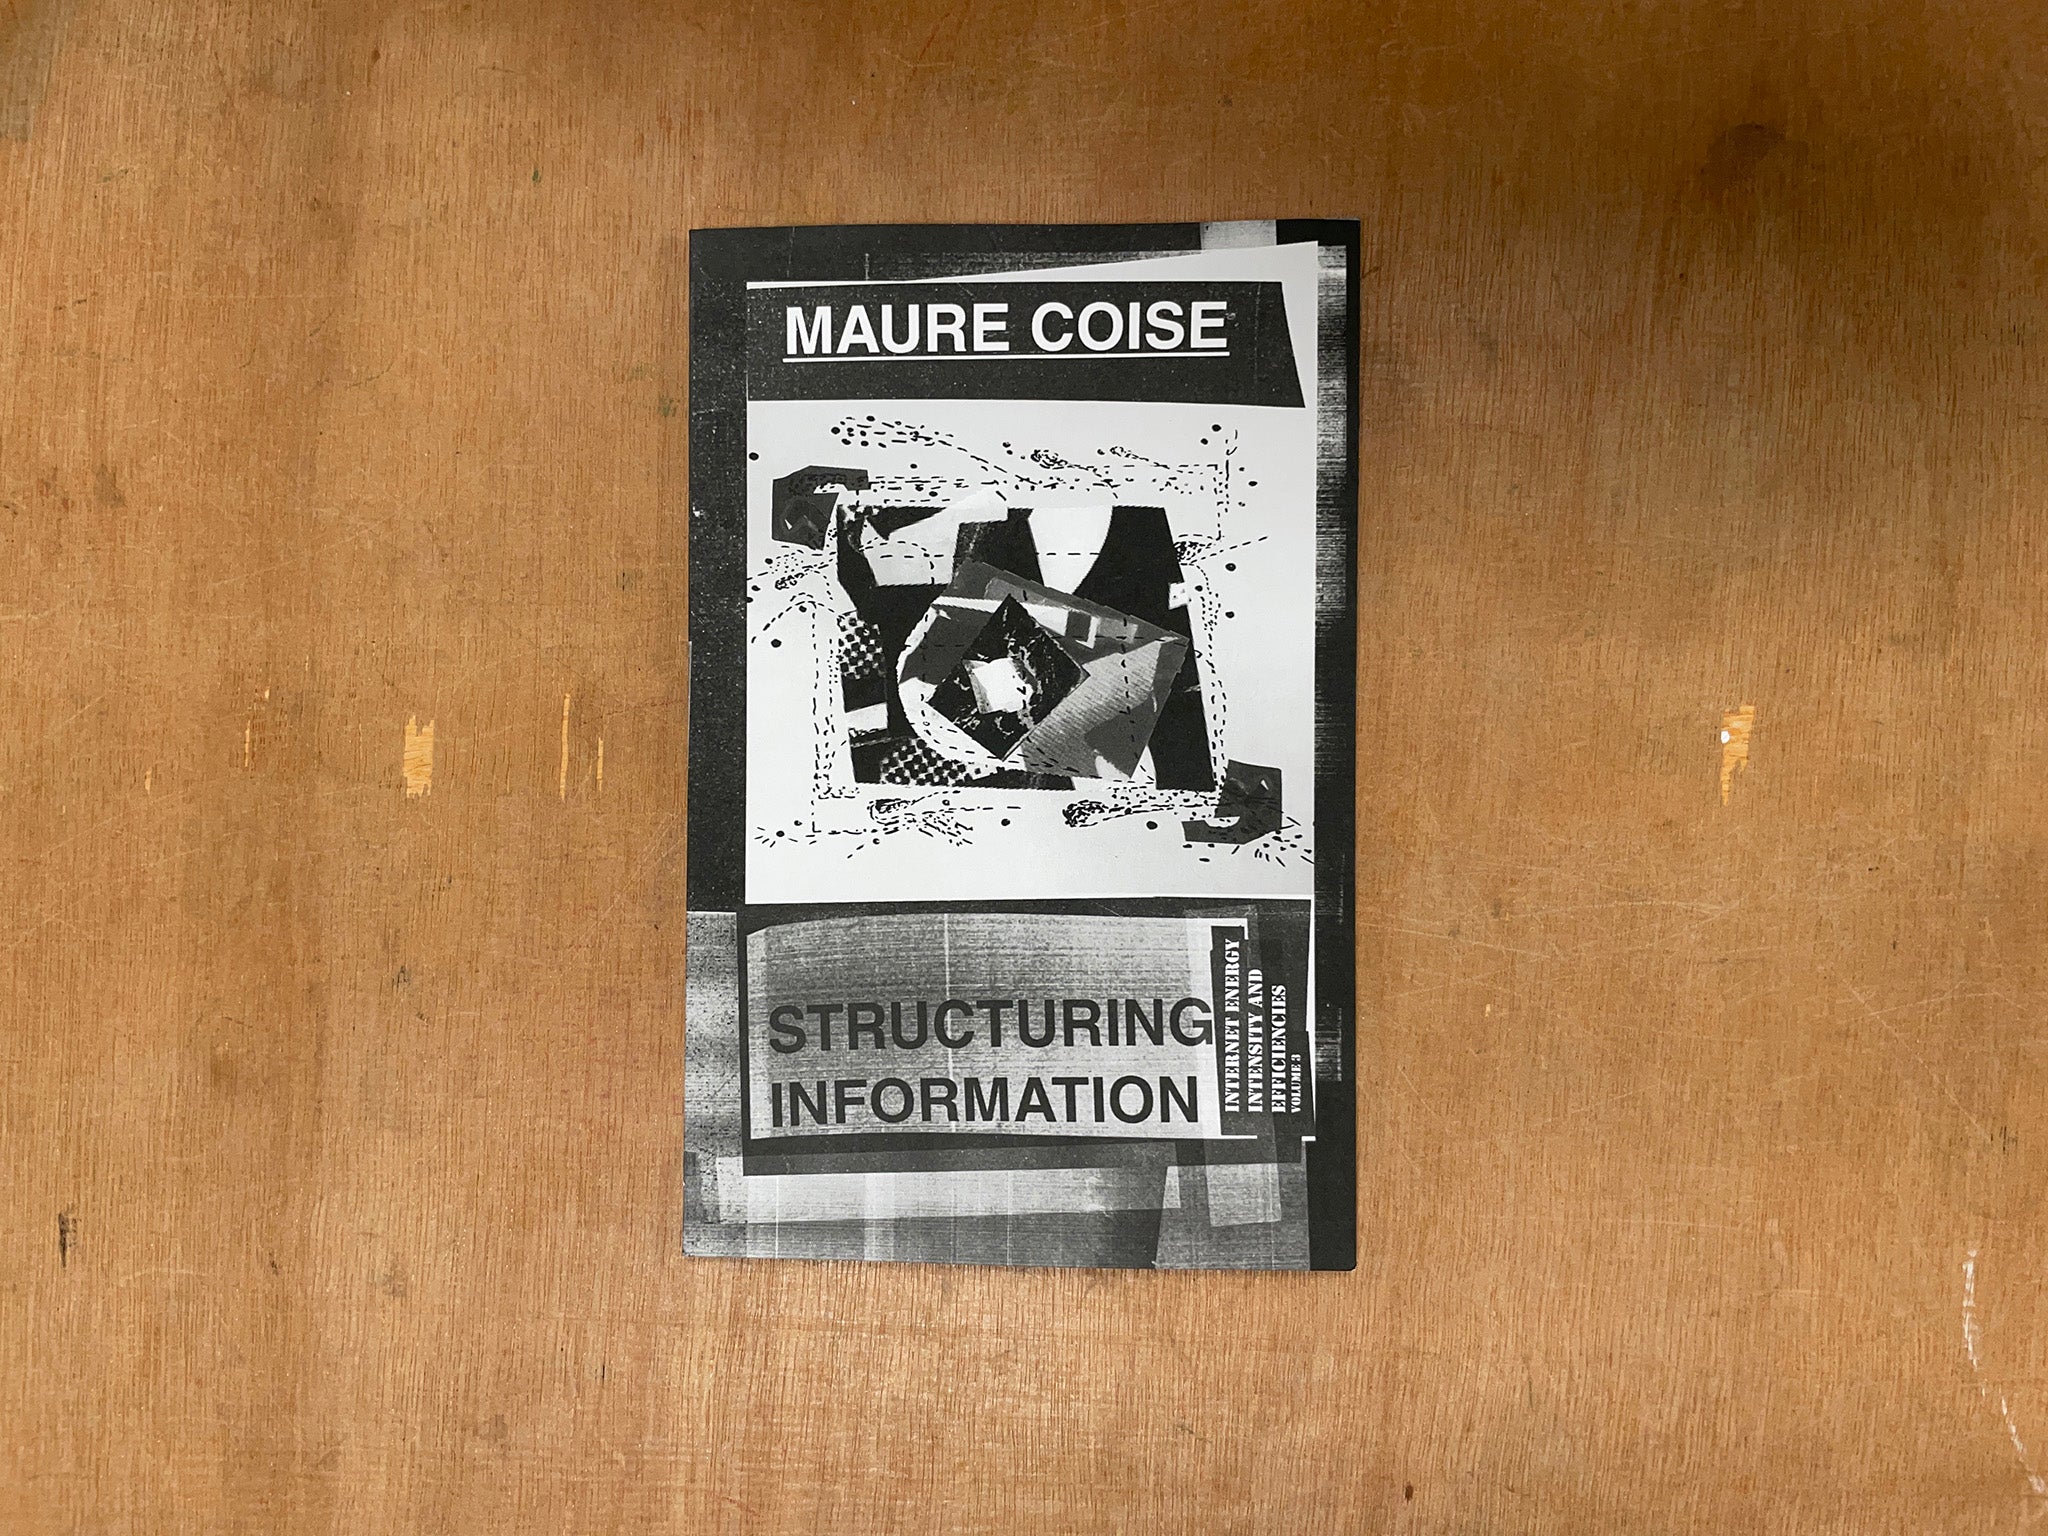 STRUCTURING INFORMATION by Maure Coise